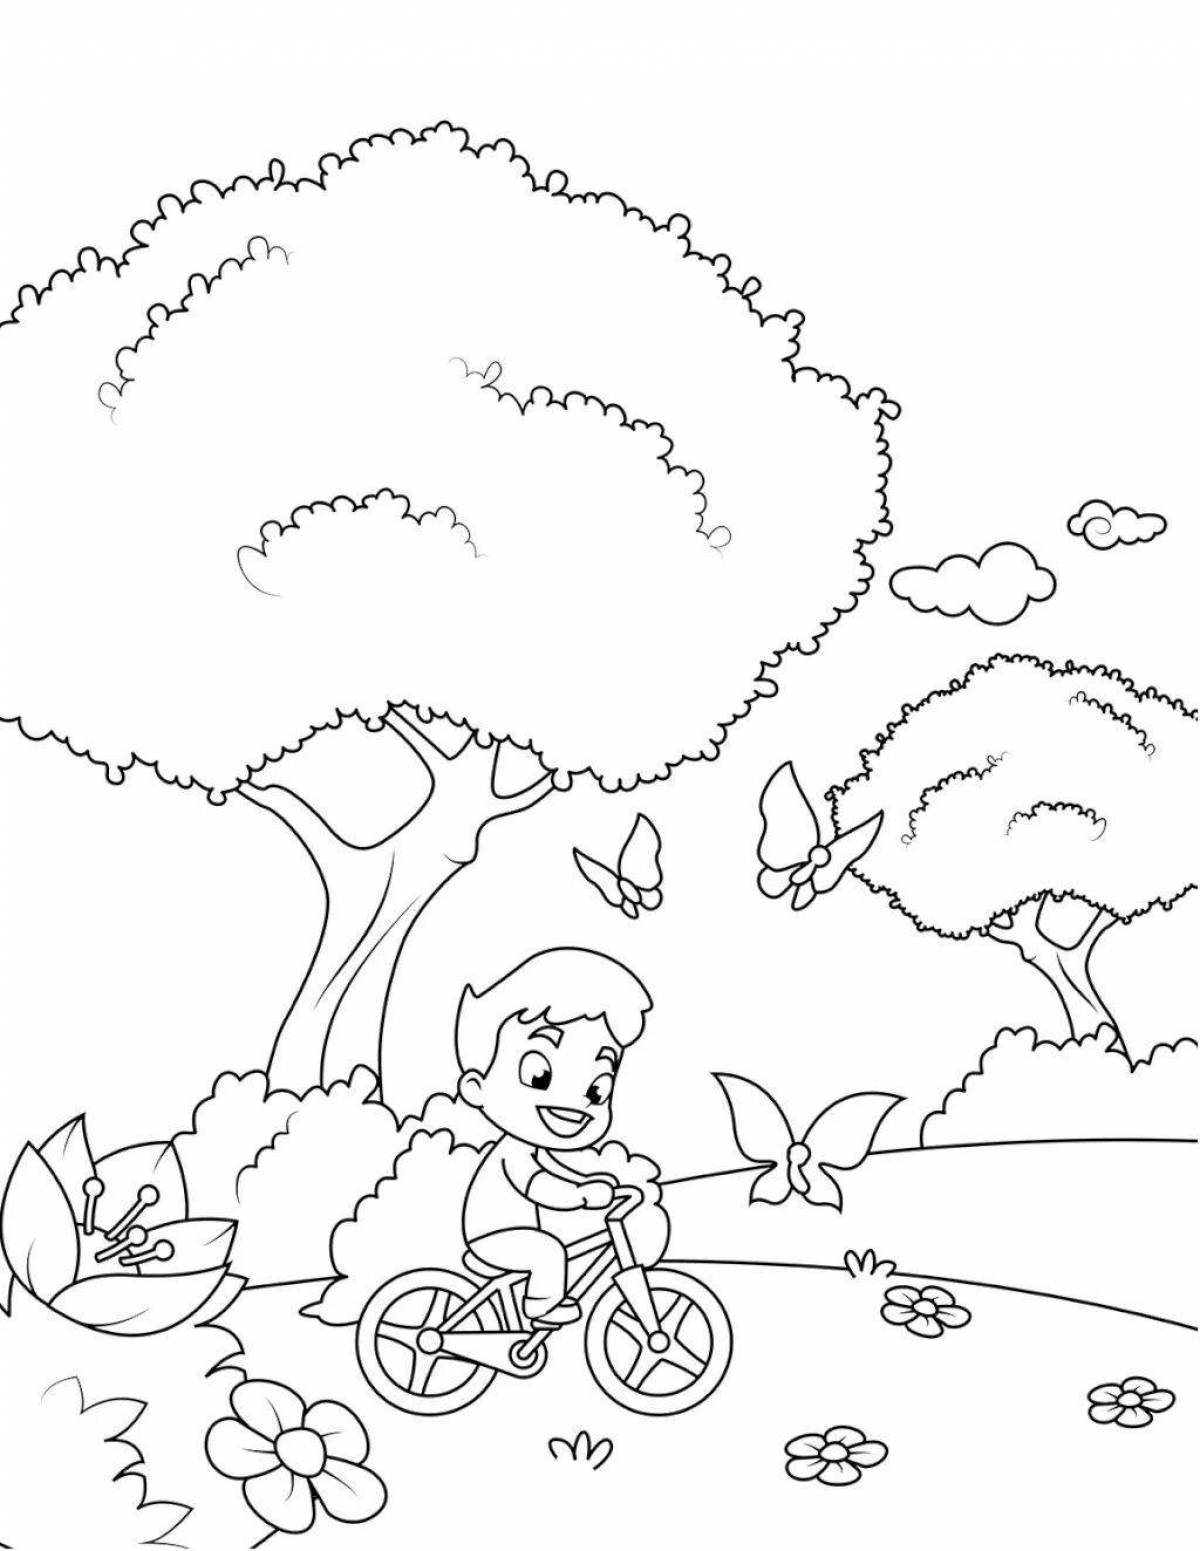 Exotic nature coloring pages for boys